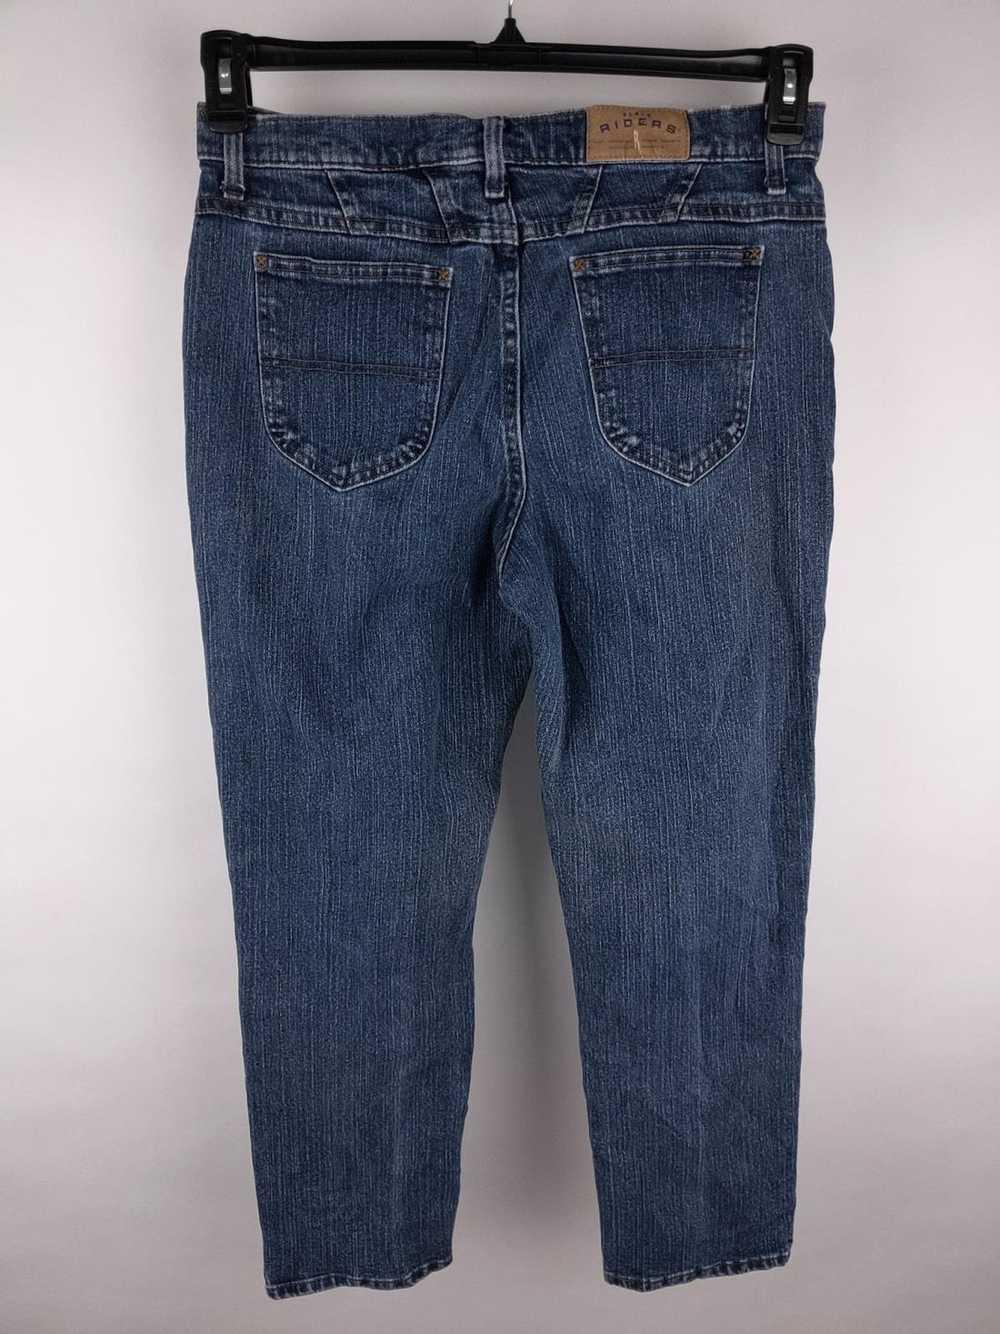 Lee Riders Mom Jeans - image 2